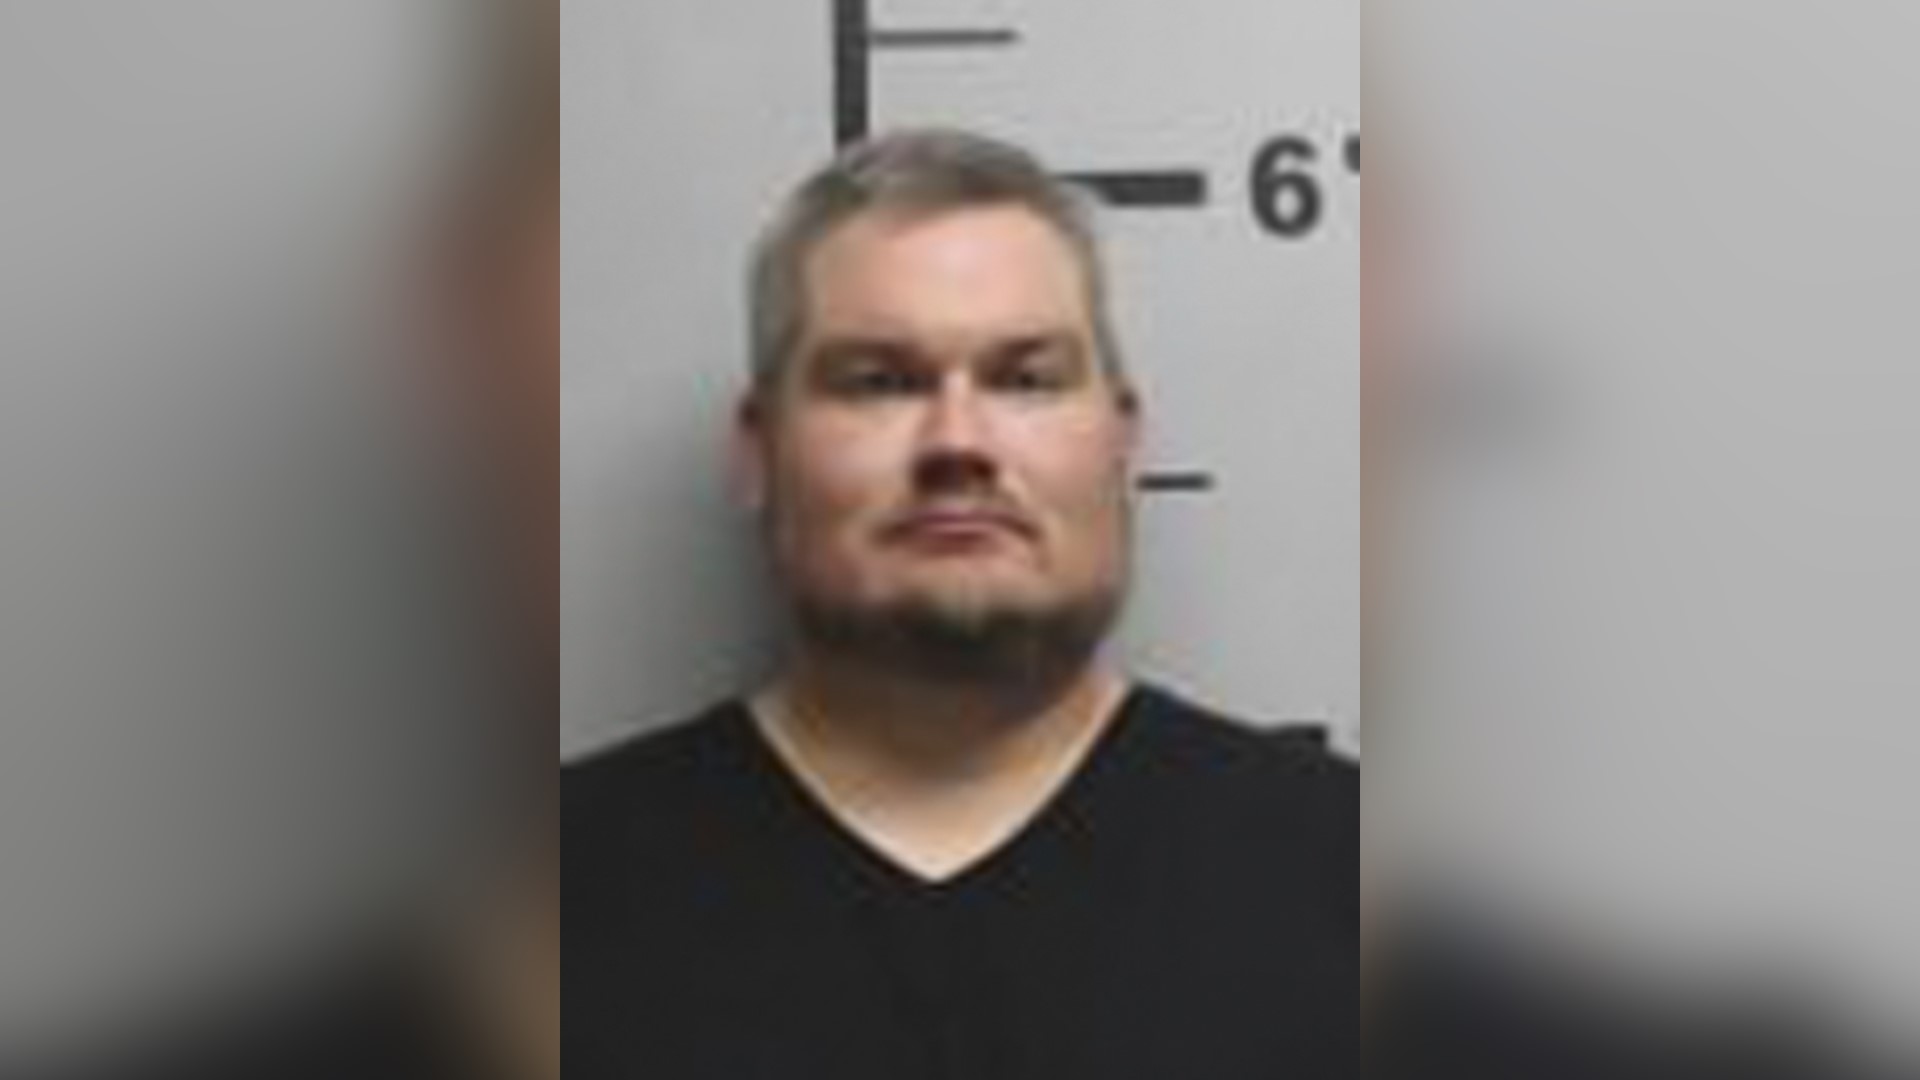 Derek Stamps, who was an employee with the Benton County Sheriff's Office, was arrested for a DWI while driving a county-issued vehicle.